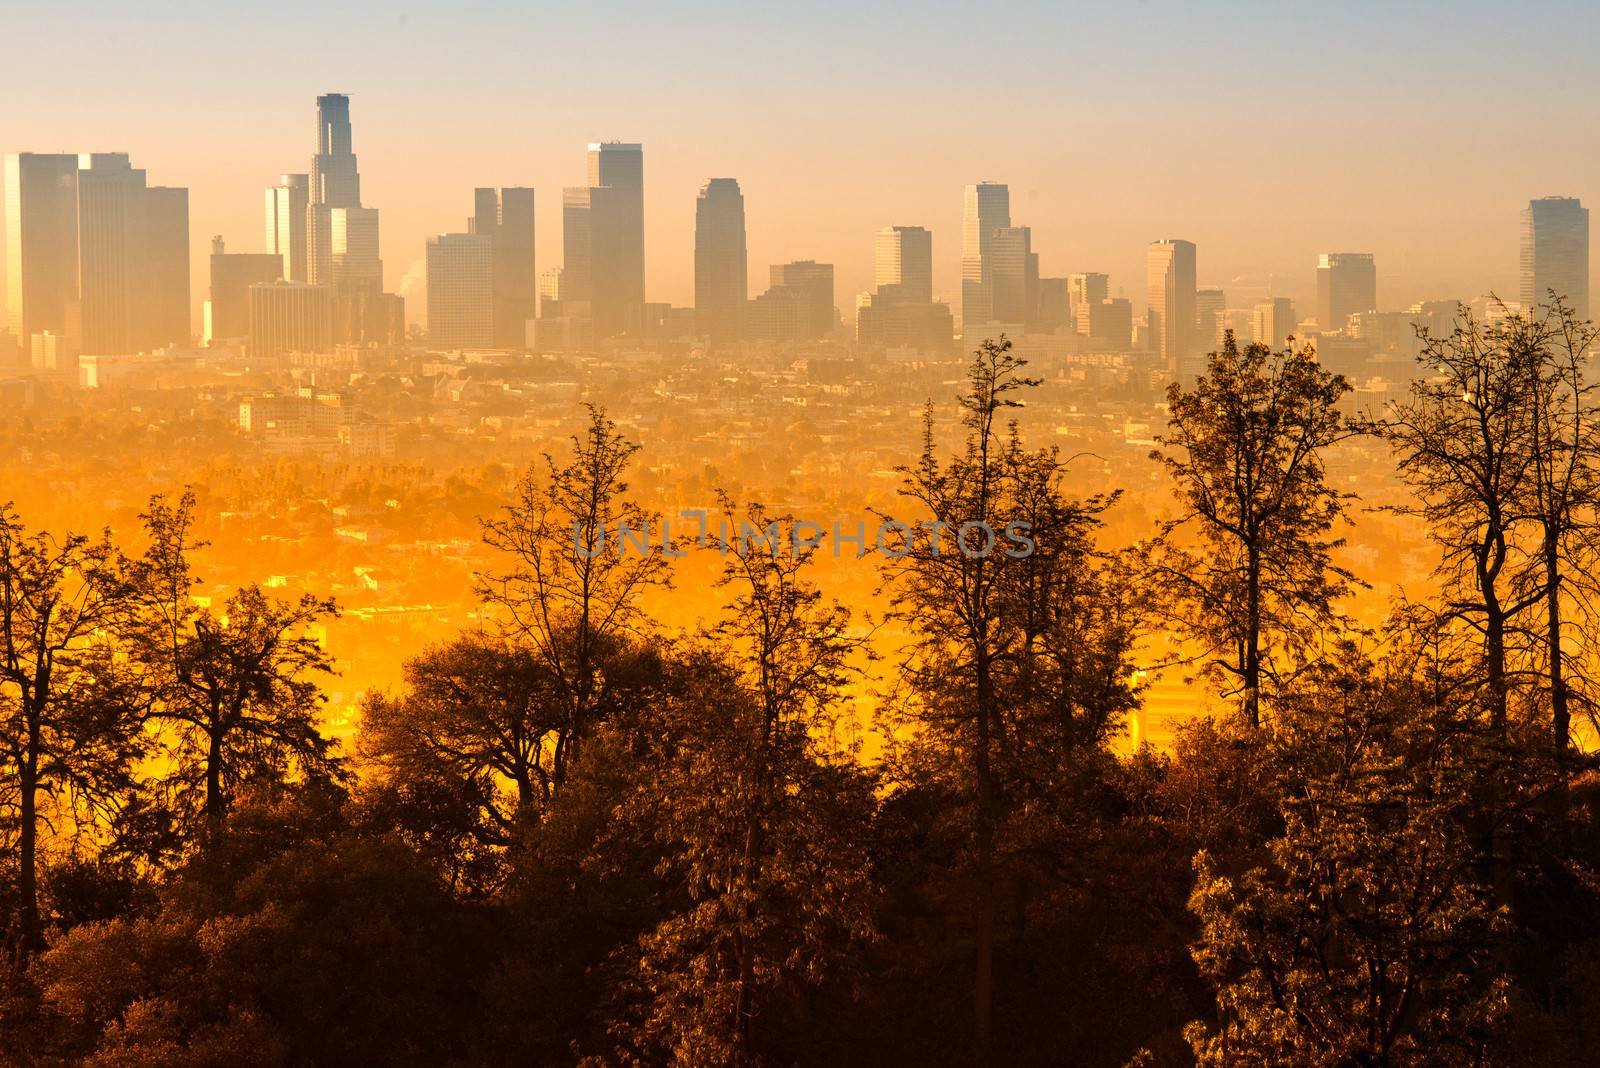 Downtown Los Angeles as seen from the Griffith Observatory by CelsoDiniz